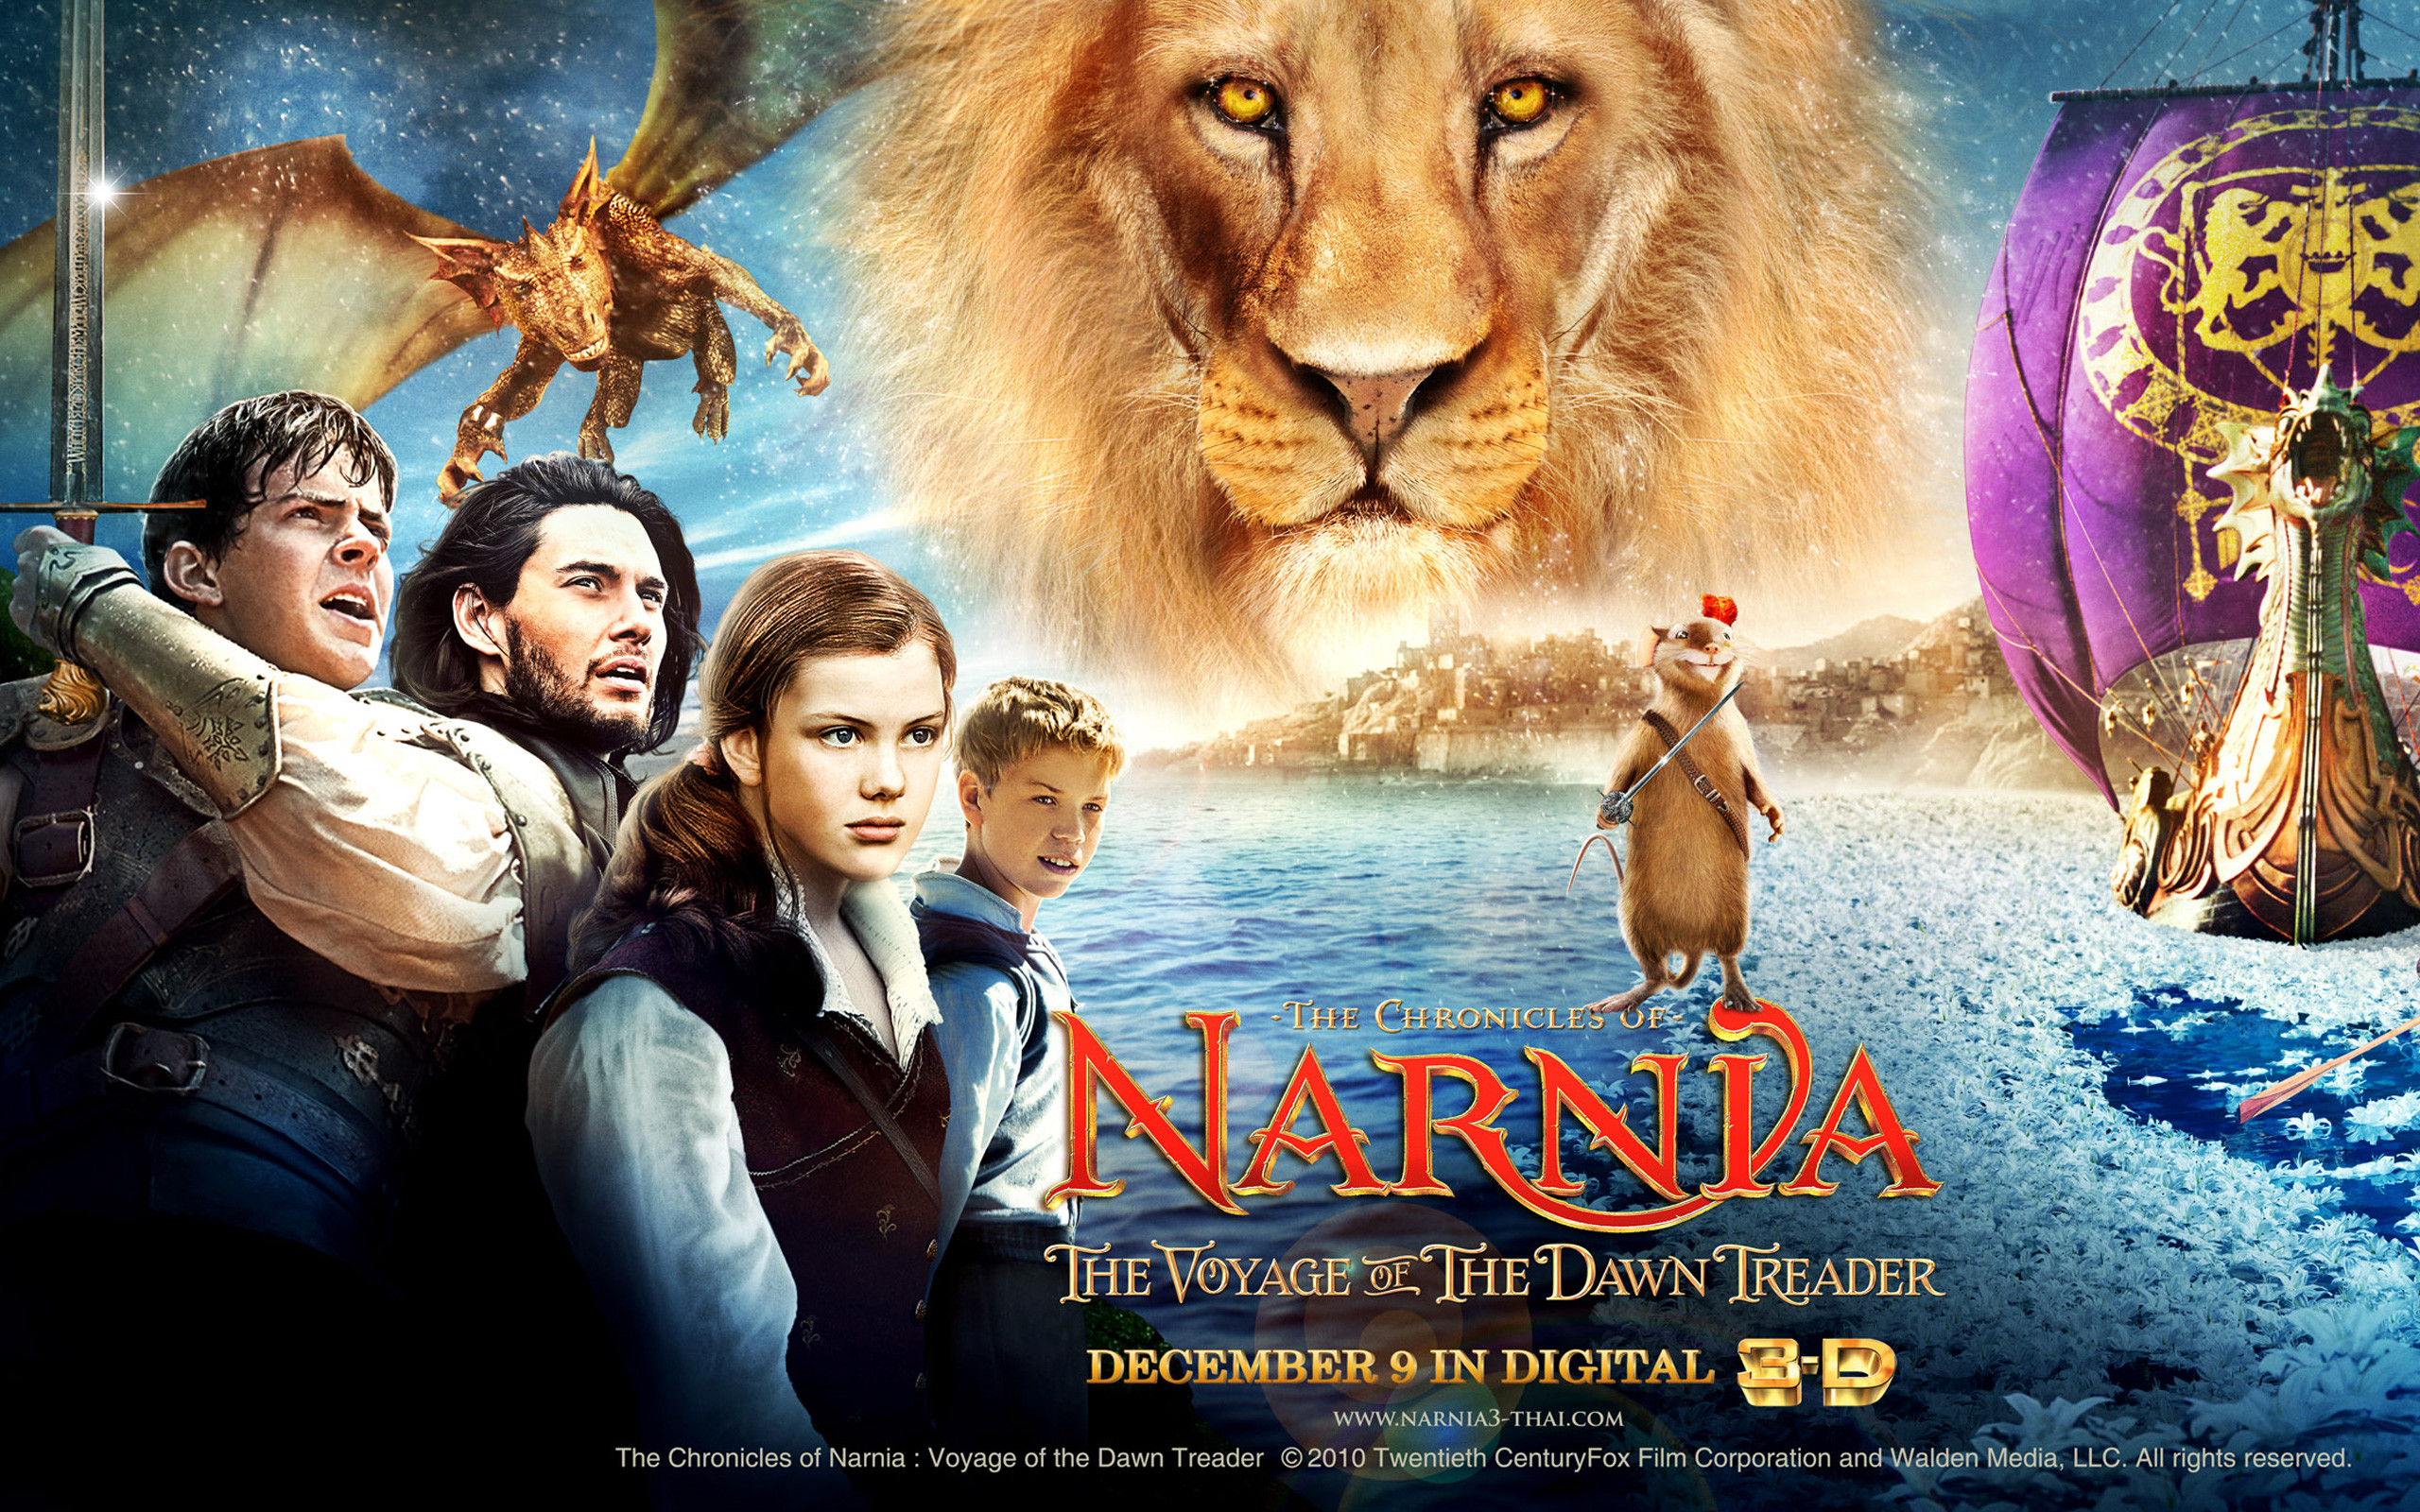 2560x1600 The Chronicles of Narnia Voyage of the Dawn Treader